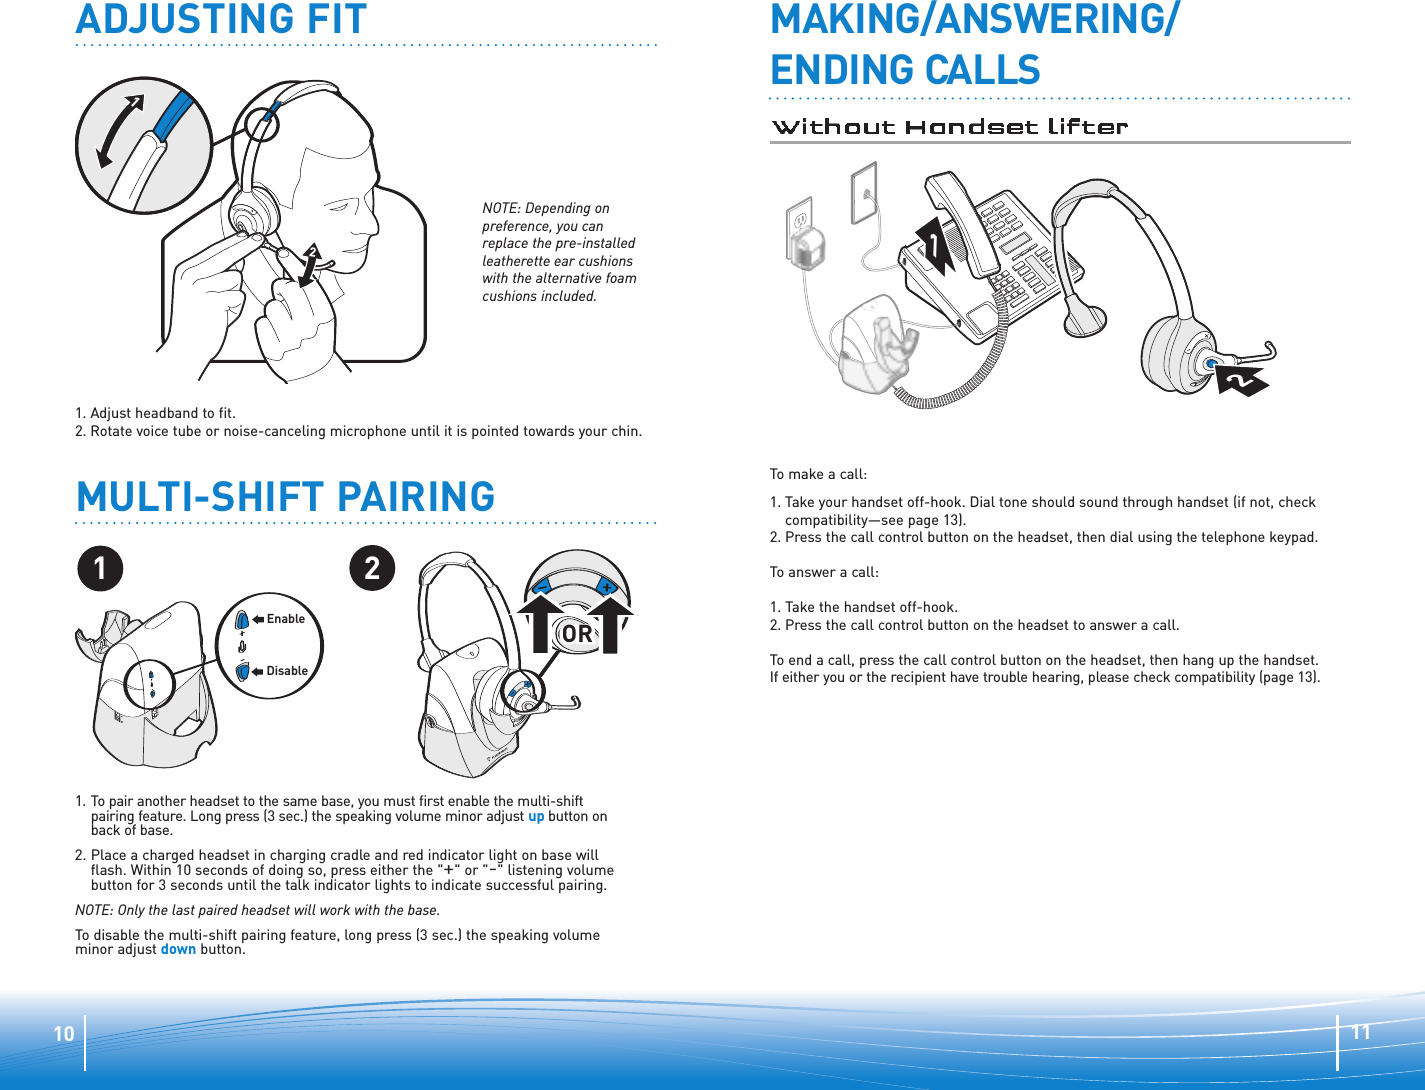 111012ADJUSTING FIT1. Adjust headband to fit.  2. Rotate voice tube or noise-canceling microphone until it is pointed towards your chin.MAKING/ANSWERING/ENDING CALLS12To make a call:1. Take your handset off-hook. Dial tone should sound through handset (if not, checkcompatibility—see page 13).2. Press the call control button on the headset, then dial using the telephone keypad. To answer a call: 1. Take the handset off-hook. 2. Press the call control button on the headset to answer a call. To end a call, press the call control button on the headset, then hang up the handset. If either you or the recipient have trouble hearing, please check compatibility (page 13).NOTE: Depending onpreference, you canreplace the pre-installedleatherette ear cushionswith the alternative foamcushions included.MULTI-SHIFT PAIRING21OROROREnableDisable1. To pair another headset to the same base, you must first enable the multi-shift pairing feature. Long press (3 sec.) the speaking volume minor adjust up button onback of base. 2. Place a charged headset in charging cradle and red indicator light on base willflash. Within 10 seconds of doing so, press either the &quot;+&quot; or &quot;-&quot; listening volumebutton for 3 seconds until the talk indicator lights to indicate successful pairing.NOTE: Only the last paired headset will work with the base.To disable the multi-shift pairing feature, long press (3 sec.) the speaking volumeminor adjust down button.